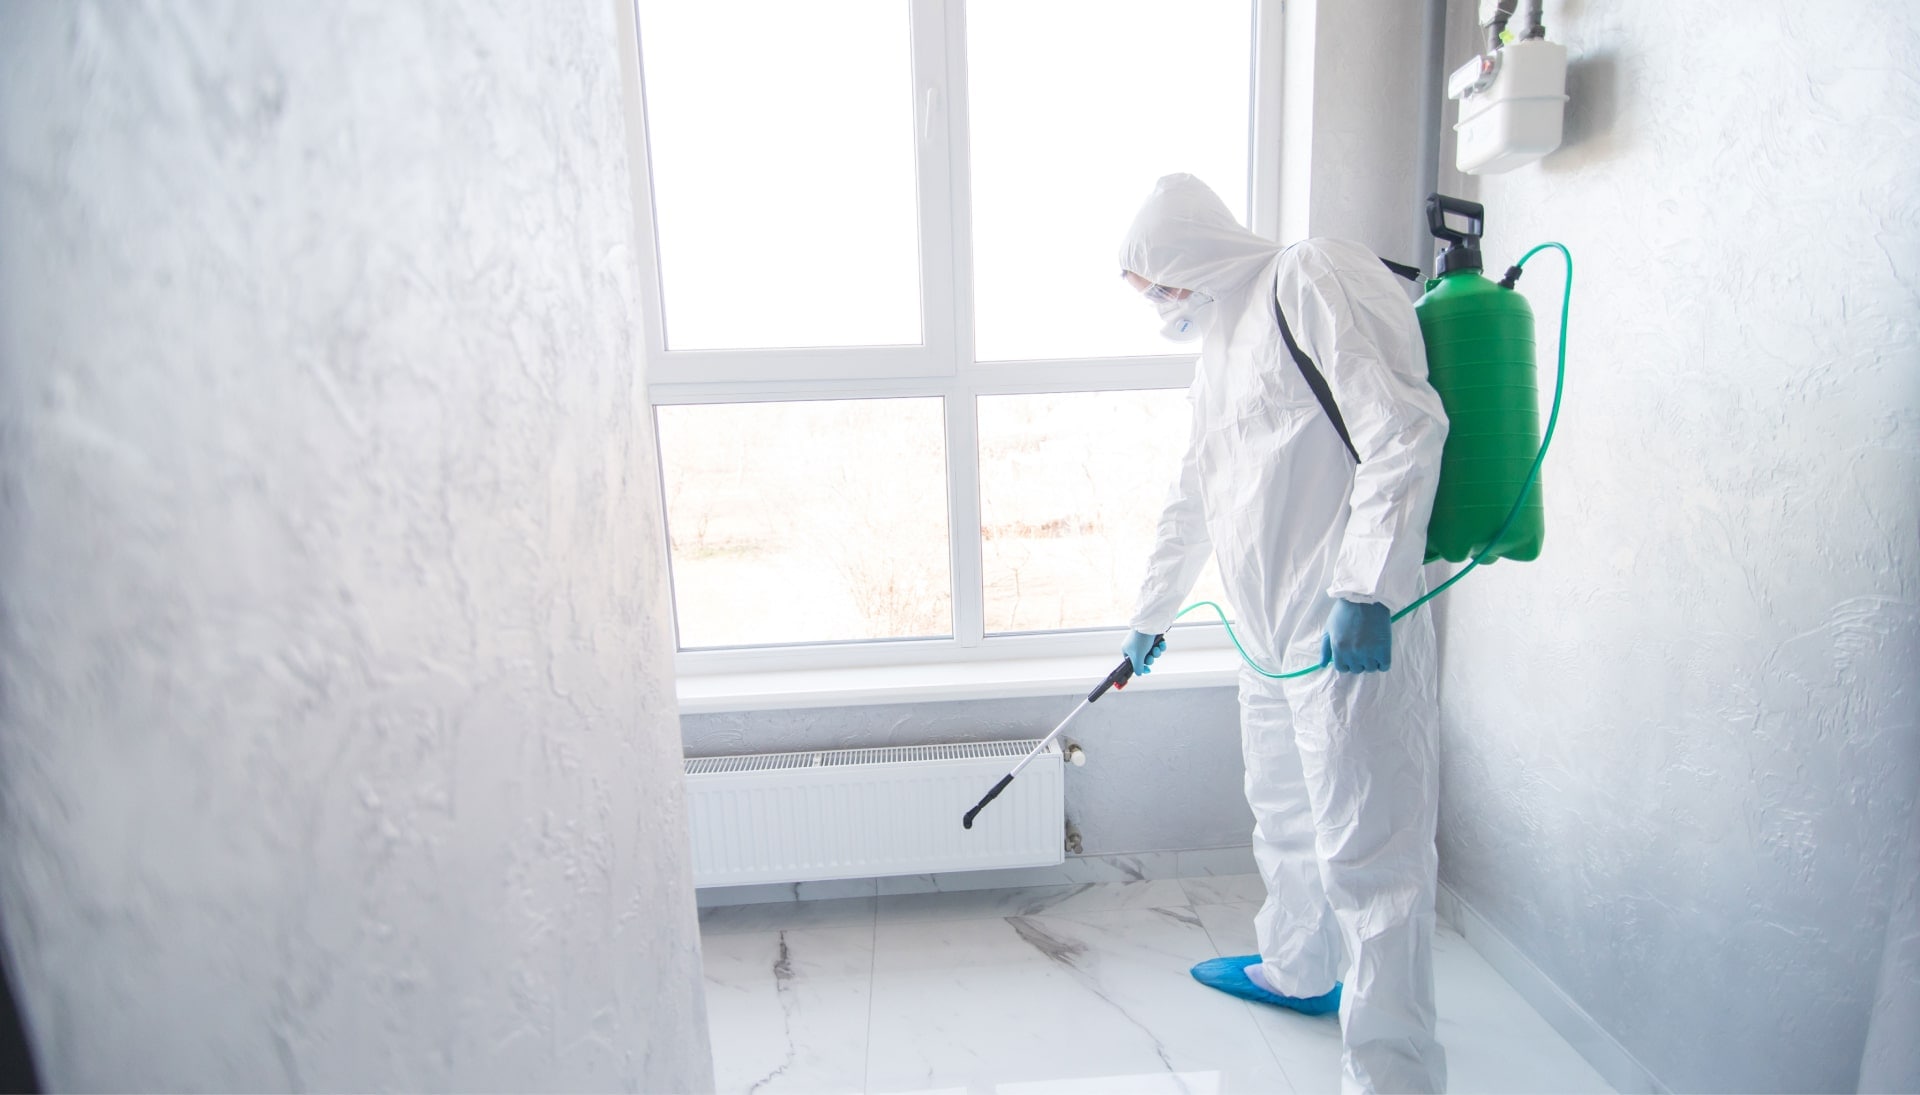 We provide the highest-quality mold inspection, testing, and removal services in the Erie, Pennsylvania area.